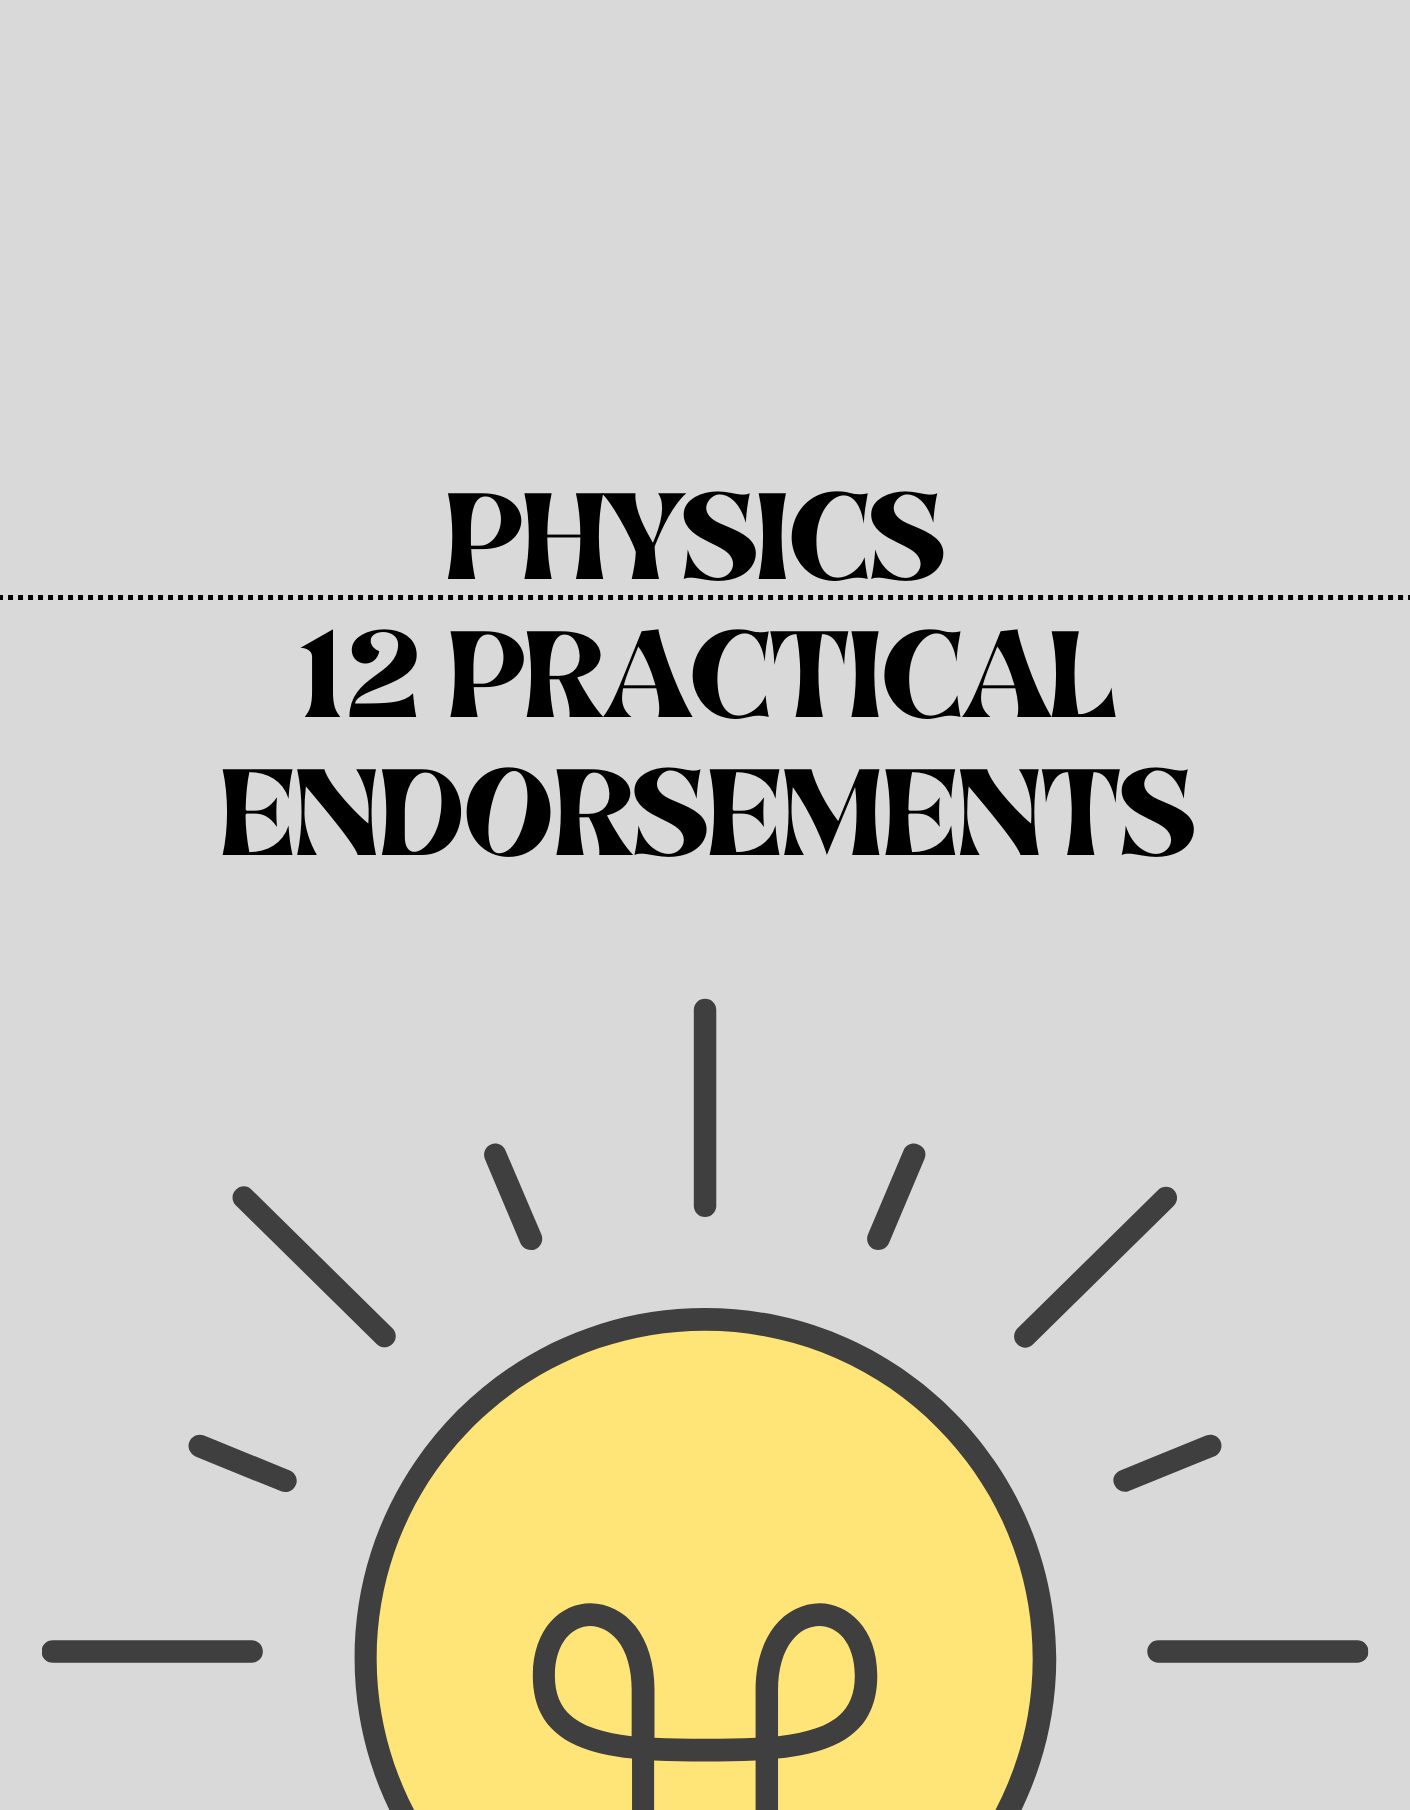 12 Practical Endorsements A Level Physics Without Examinations. - Exam Centre Birmingham Limited